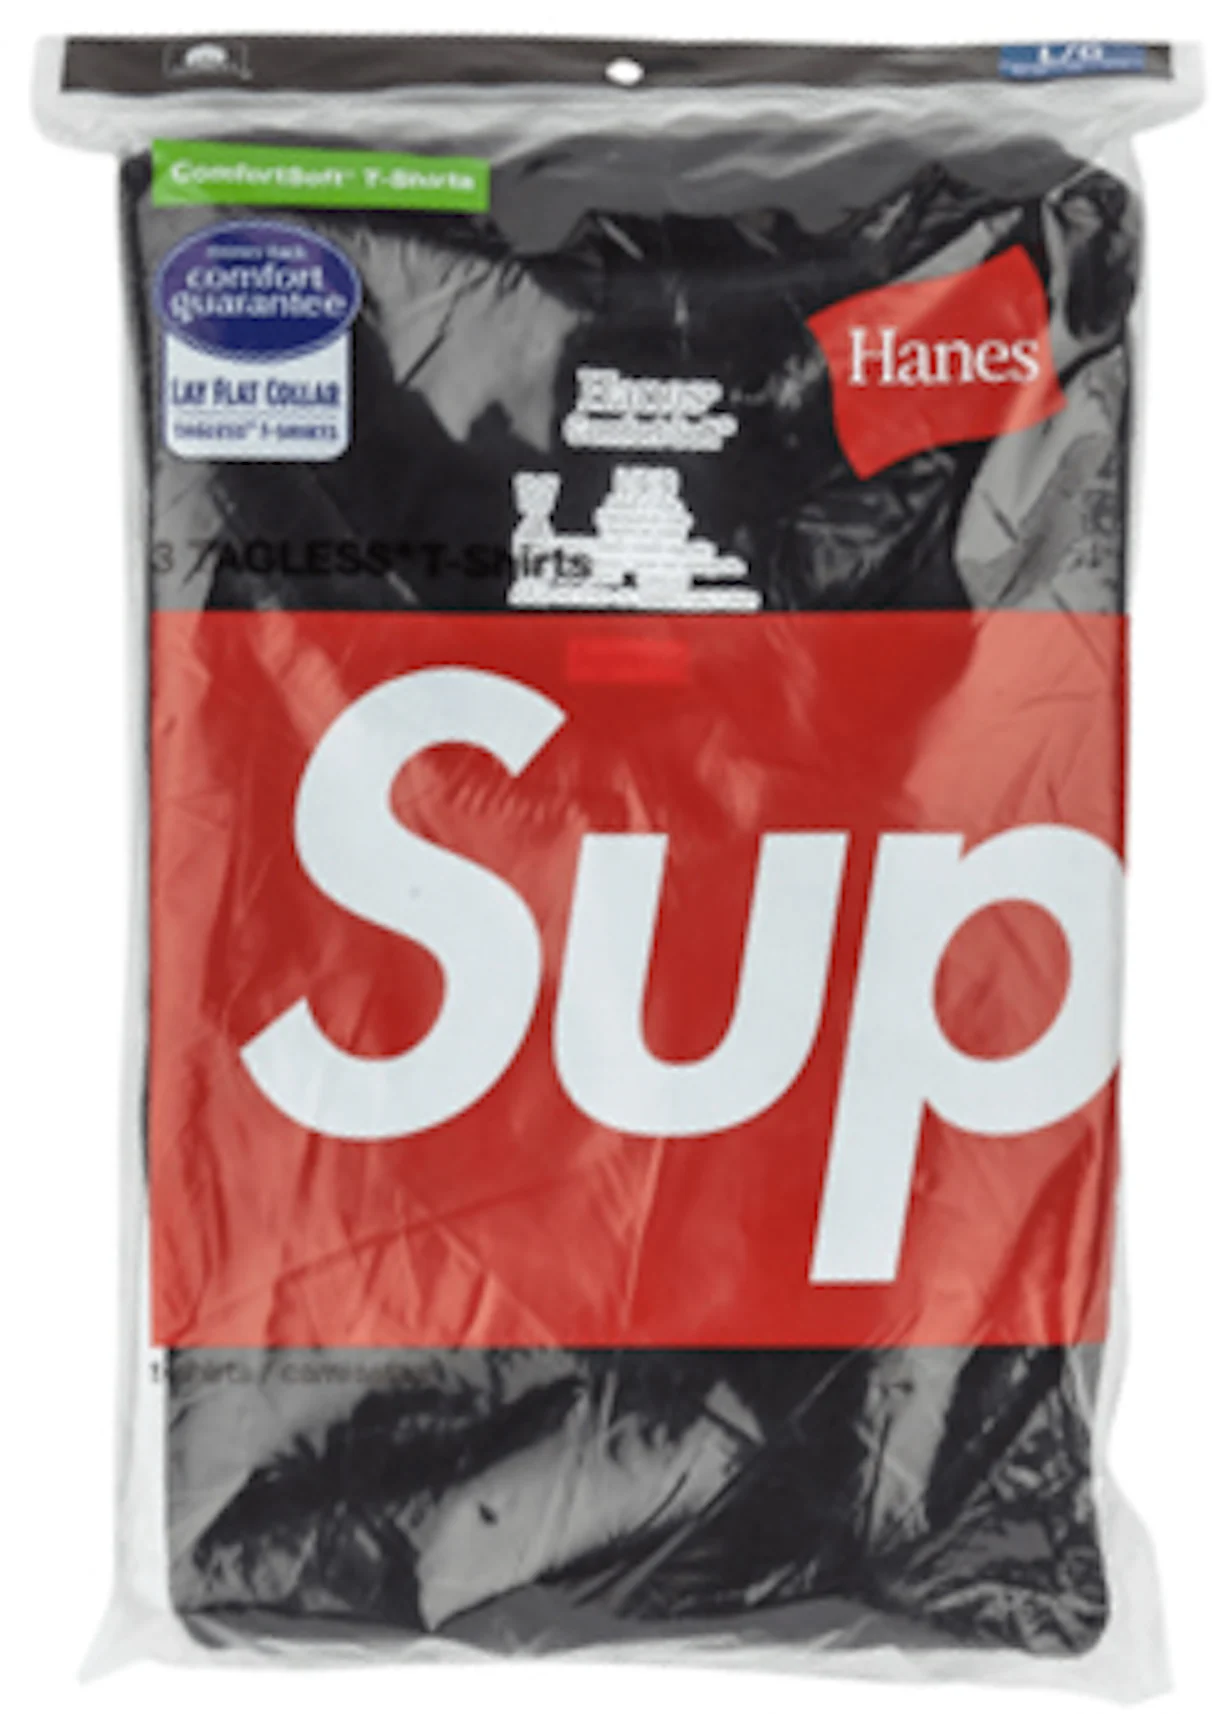 images./images/Supreme-Hanes-Tagless-Tee